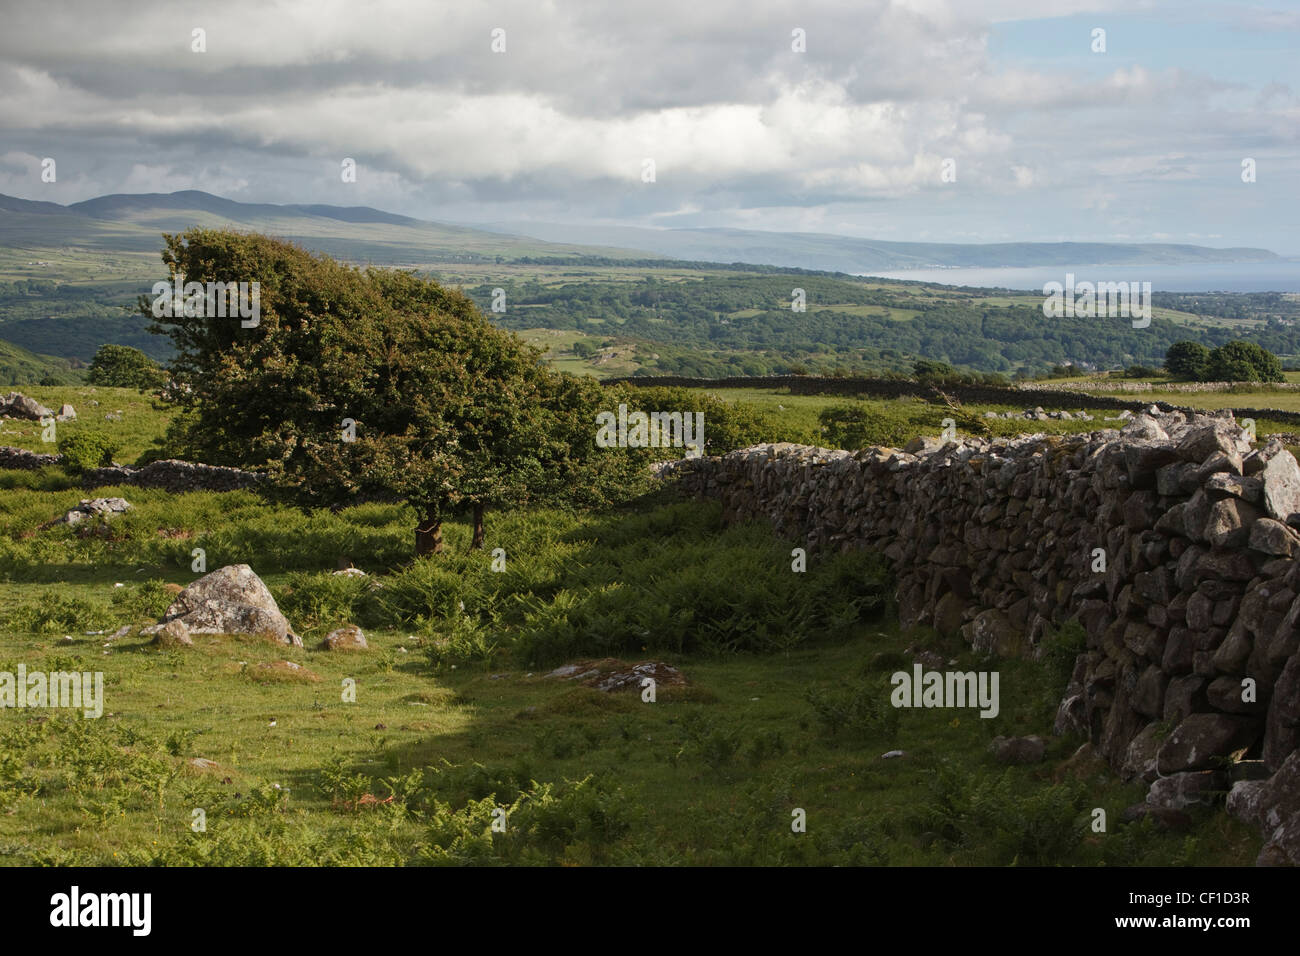 A Hawthorn tree by a traditional stone wall in the Snowdonia National Park. Stock Photo